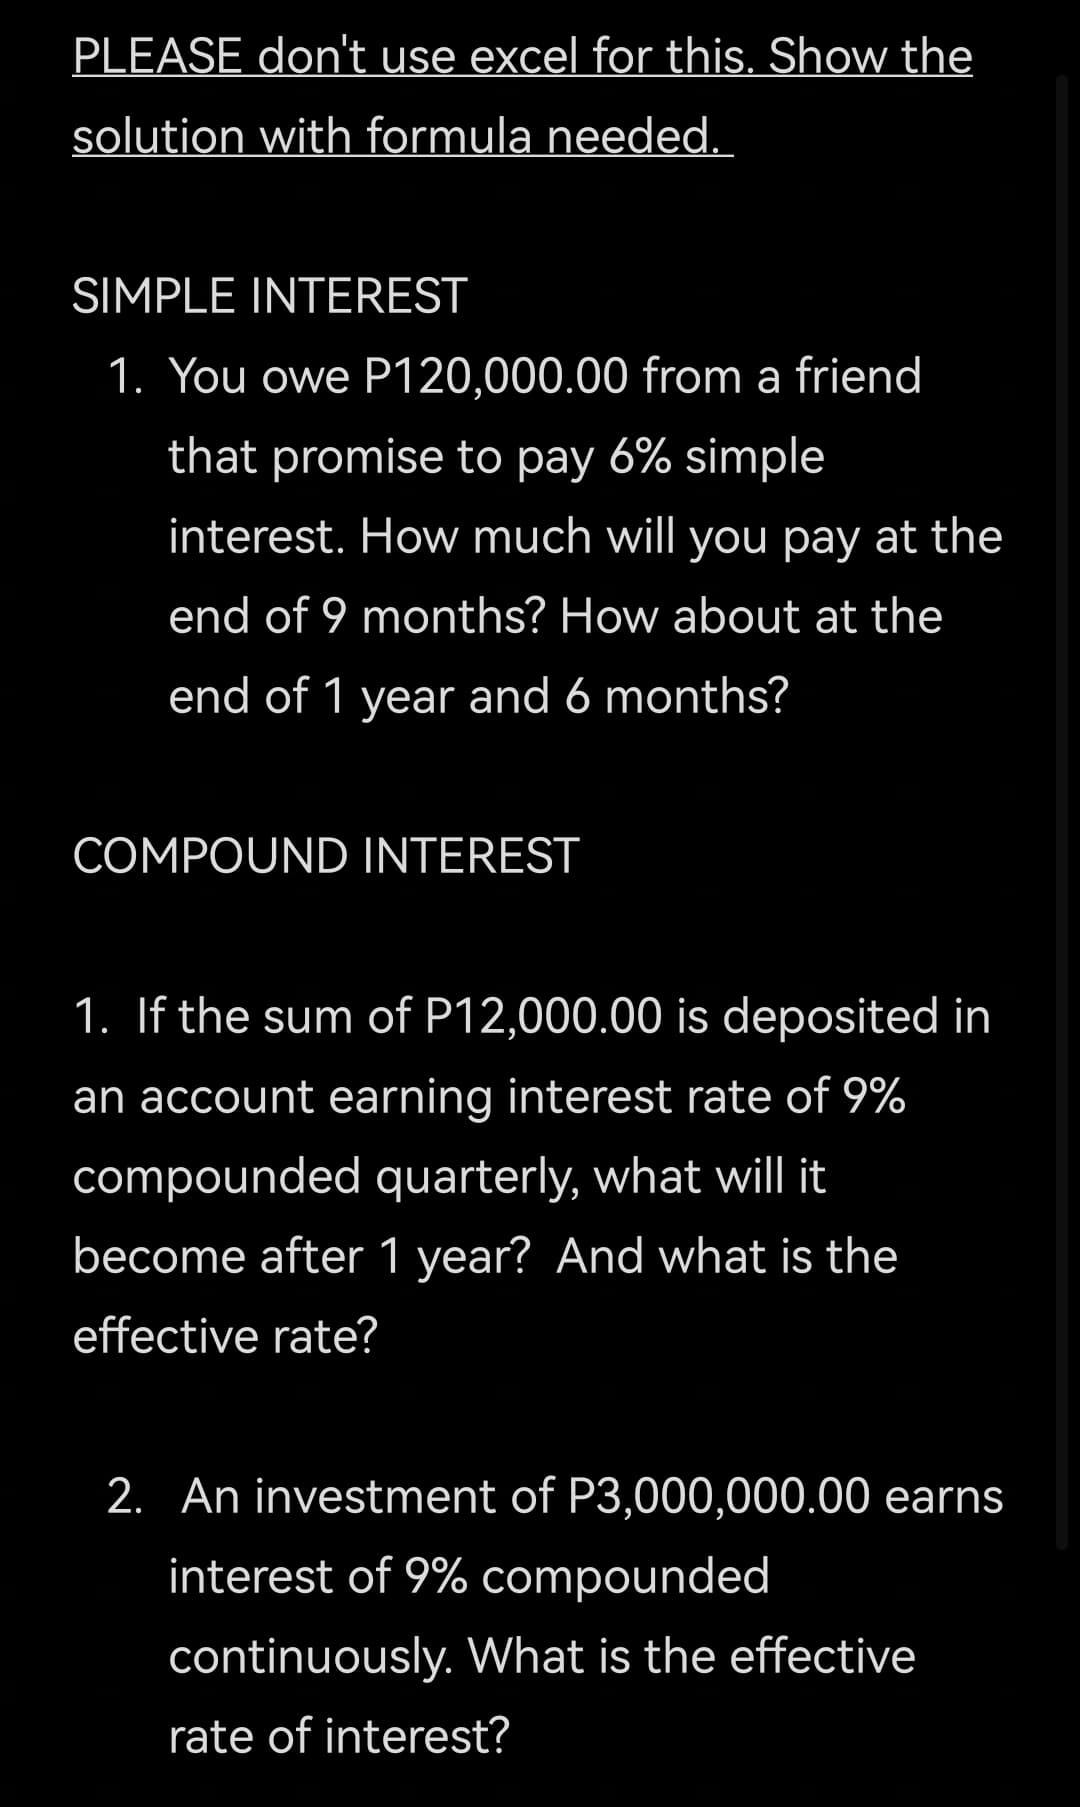 PLEASE don't use excel for this. Show the
solution with formula needed.
SIMPLE INTEREST
1. You owe P120,000.00 from a friend
that promise to pay 6% simple
interest. How much will you pay at the
end of 9 months? How about at the
end of 1 year and 6 months?
COMPOUND INTEREST
1. If the sum of P12,000.00 is deposited in
an account earning interest rate of 9%
compounded quarterly, what will it
become after 1 year? And what is the
effective rate?
2. An investment of P3,000,000.00 earns
interest of 9% compounded
continuously. What is the effective
rate of interest?
